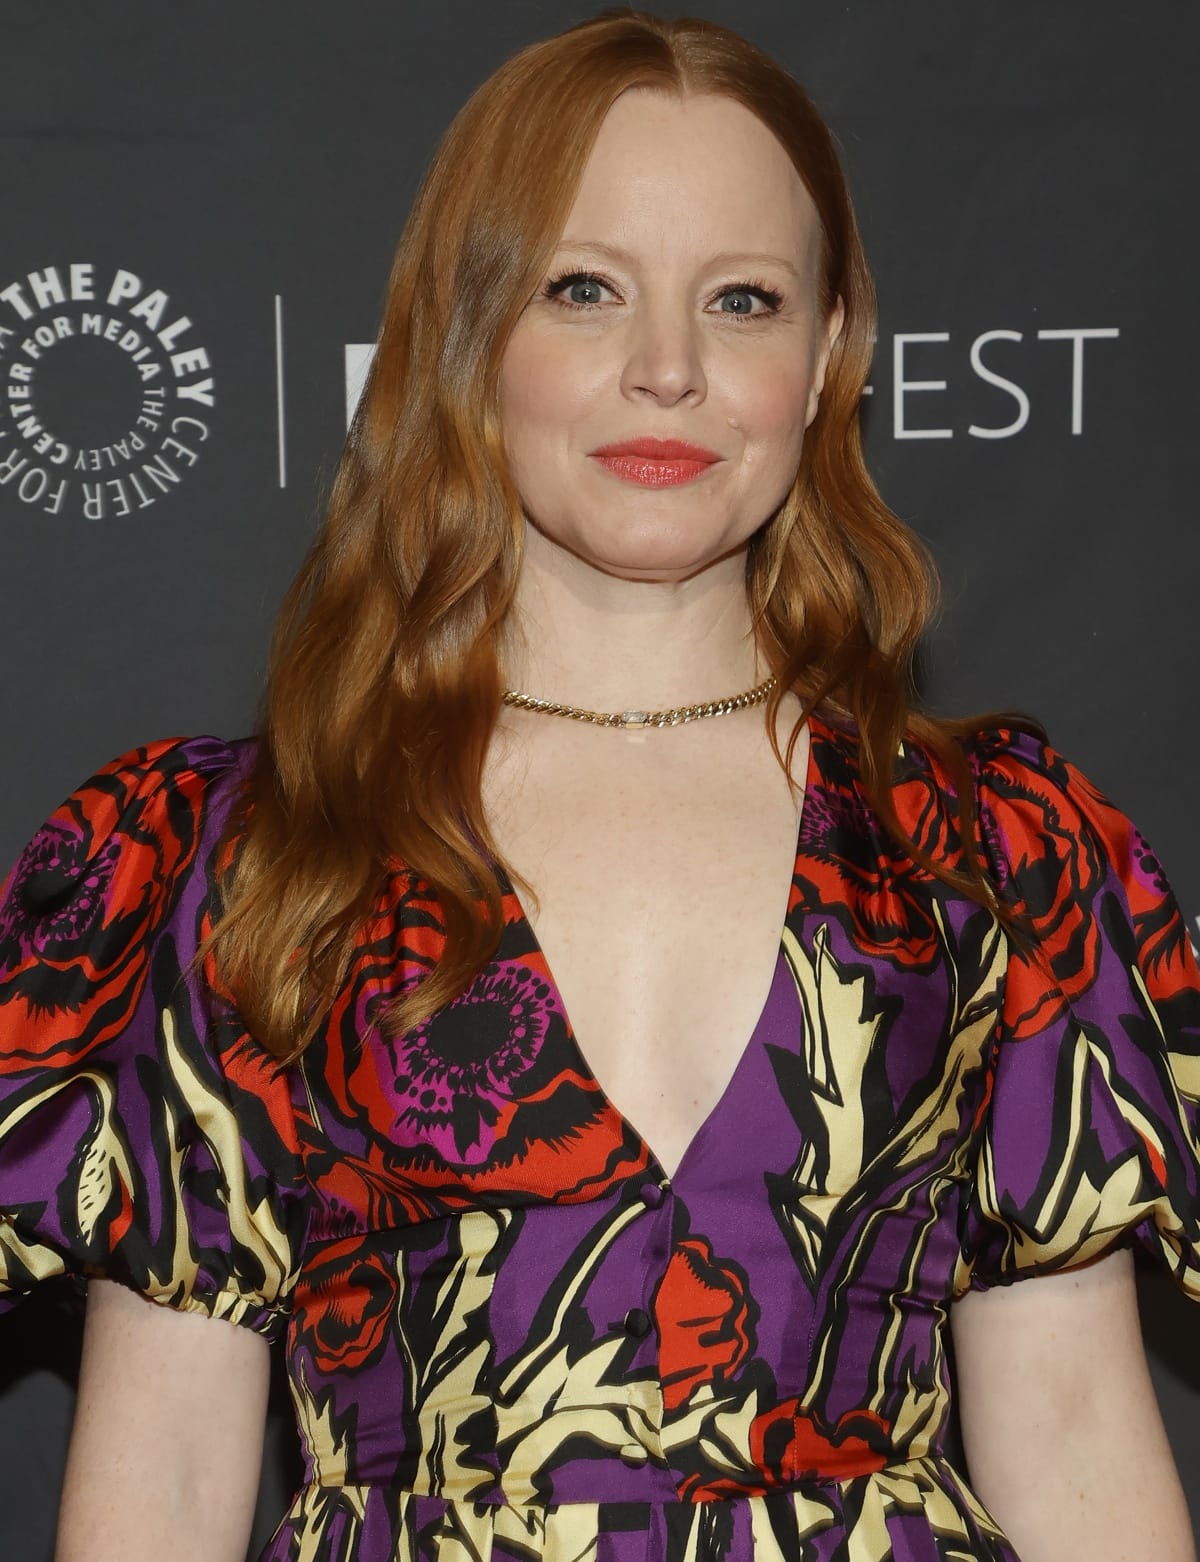 Lauren Ambrose is an American singer and actress, who is known for her roles in Can’t Hardly Wait, Six Feet Under, Torchwood, and Yellowjackets